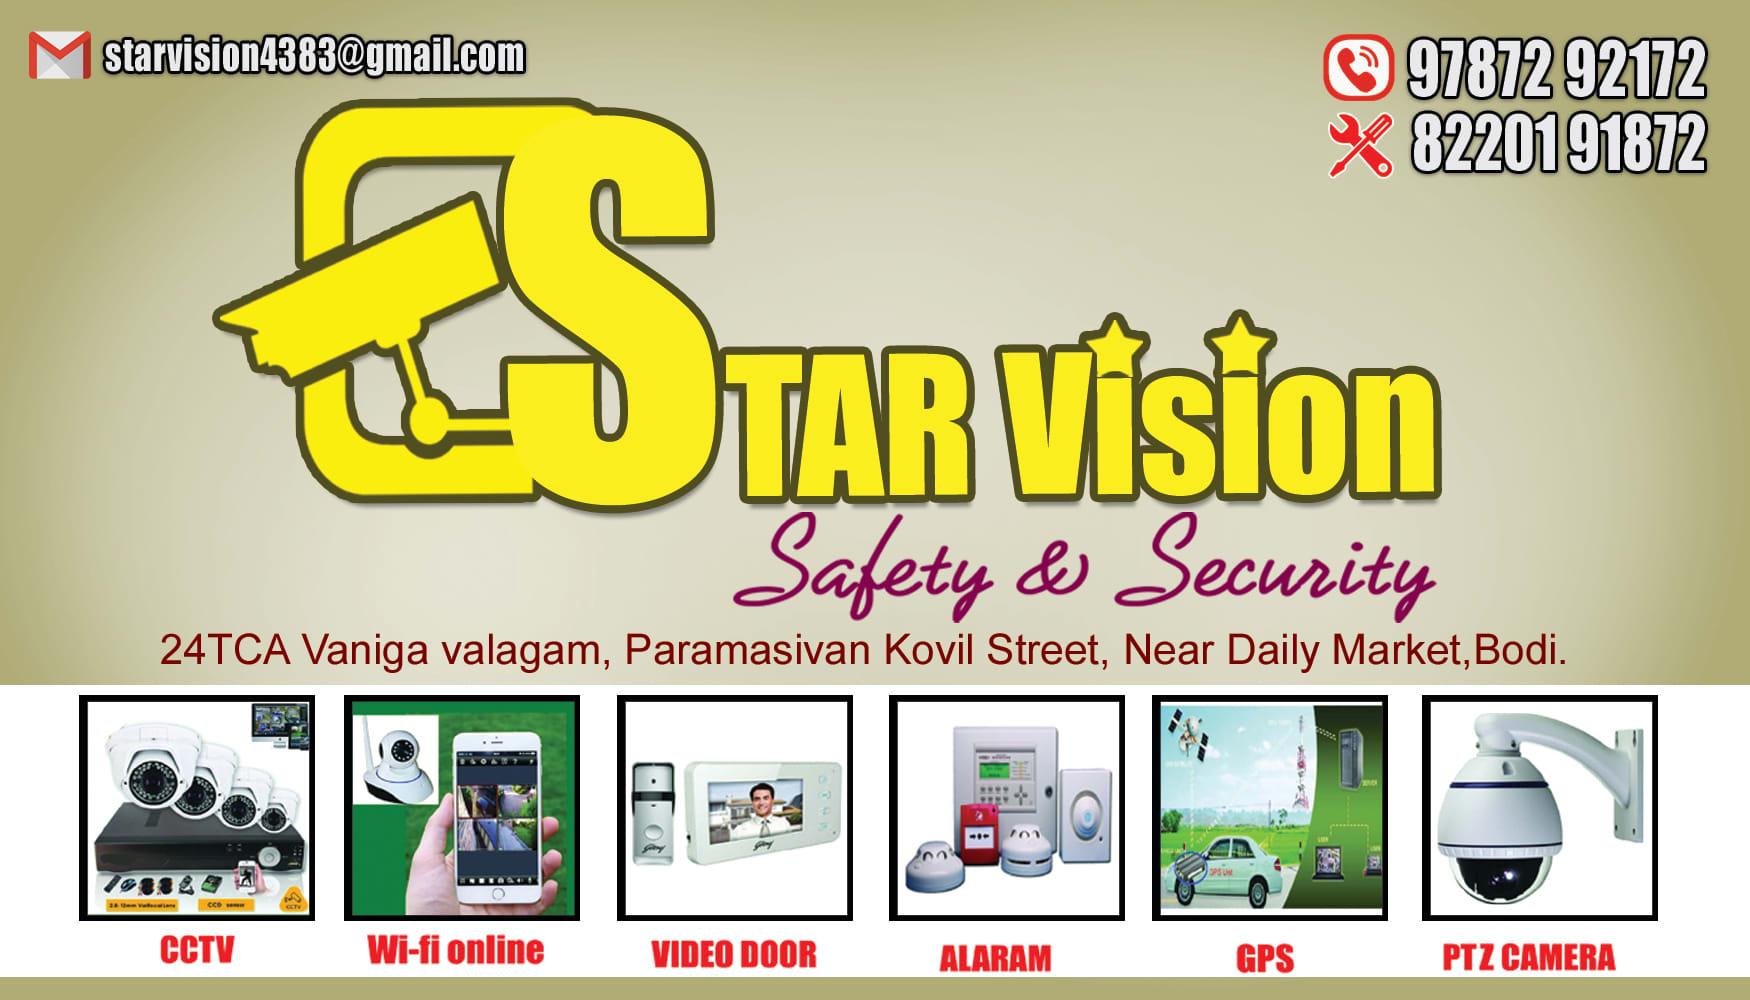 Starvision Safety & Security